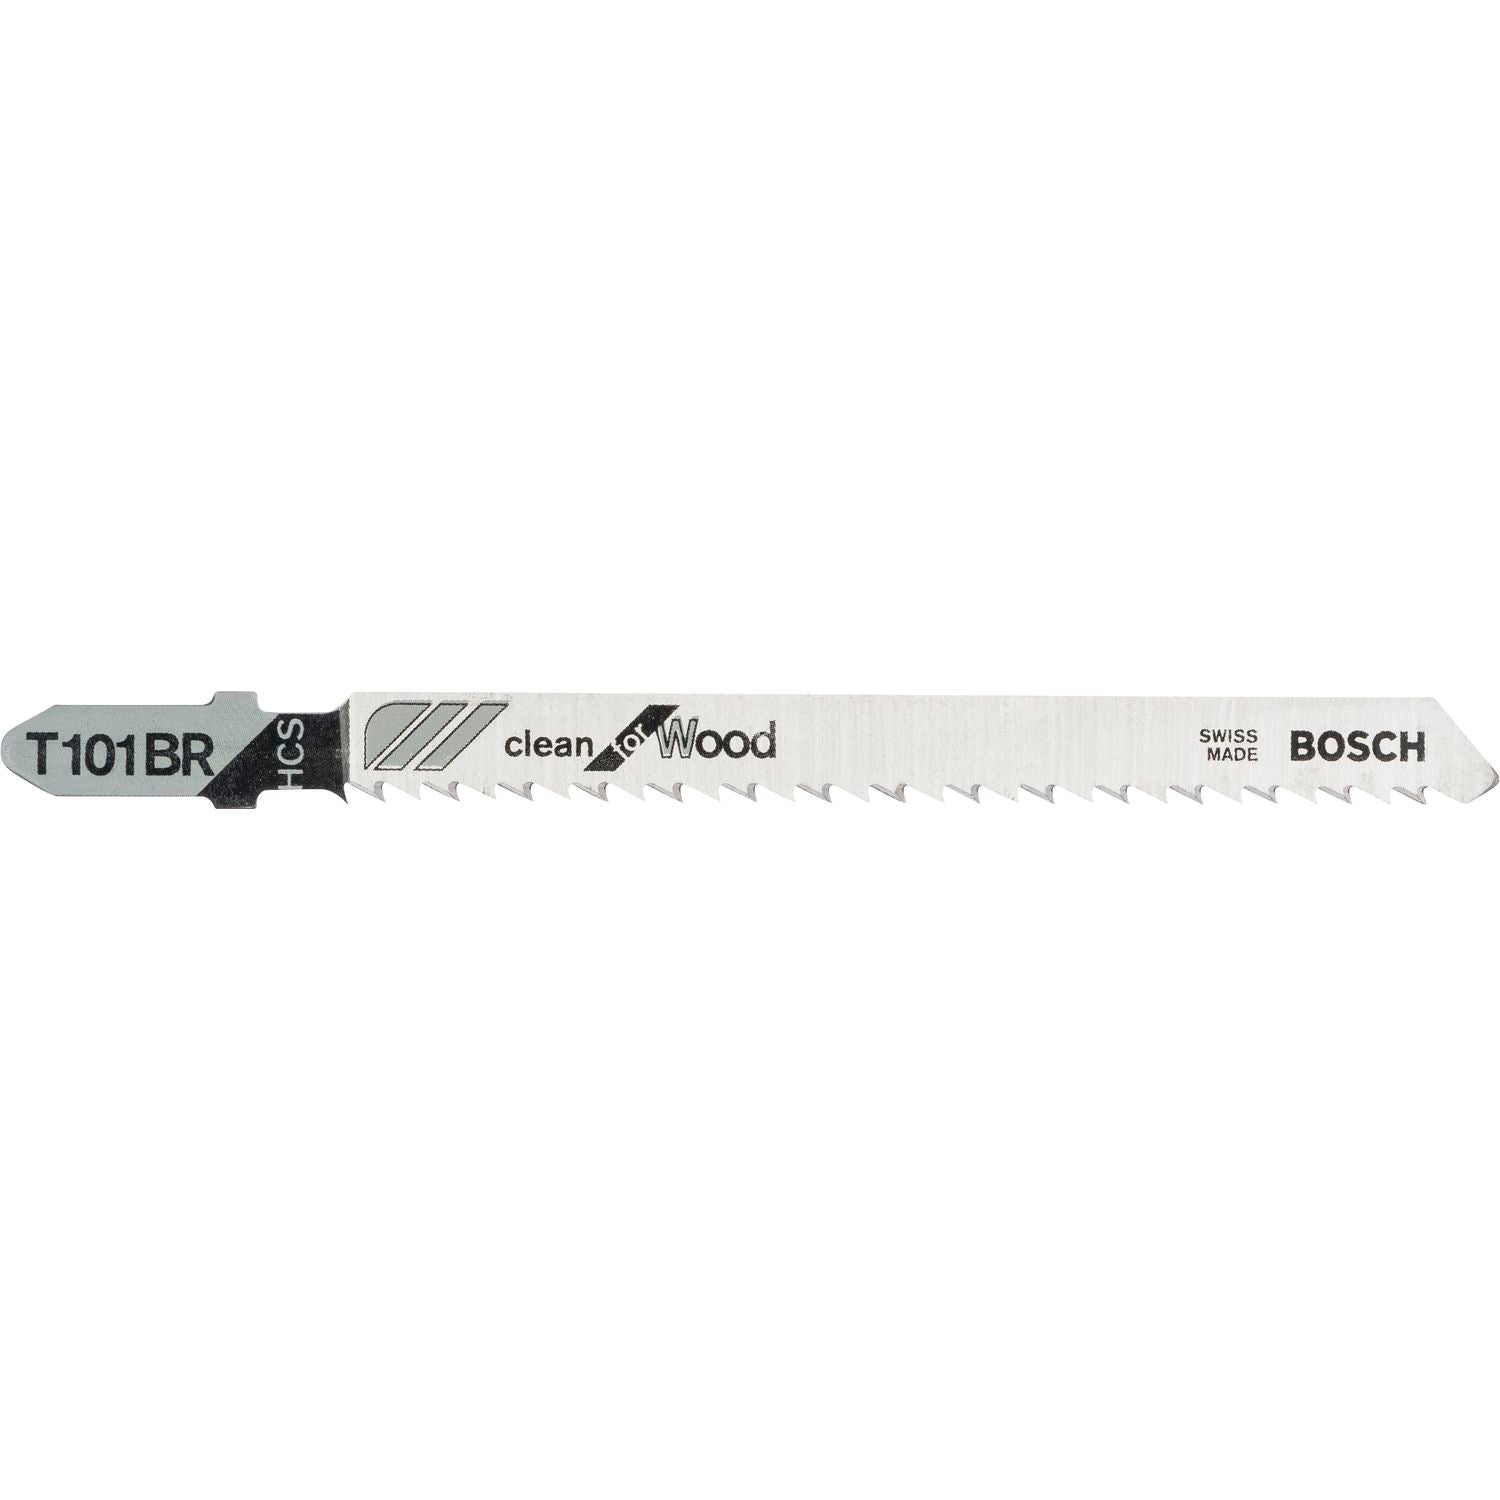 Bosch Jigsaw Blades HCS T 101 BR Clean for Wood 3 Pack 2608633779 Power Tool Services